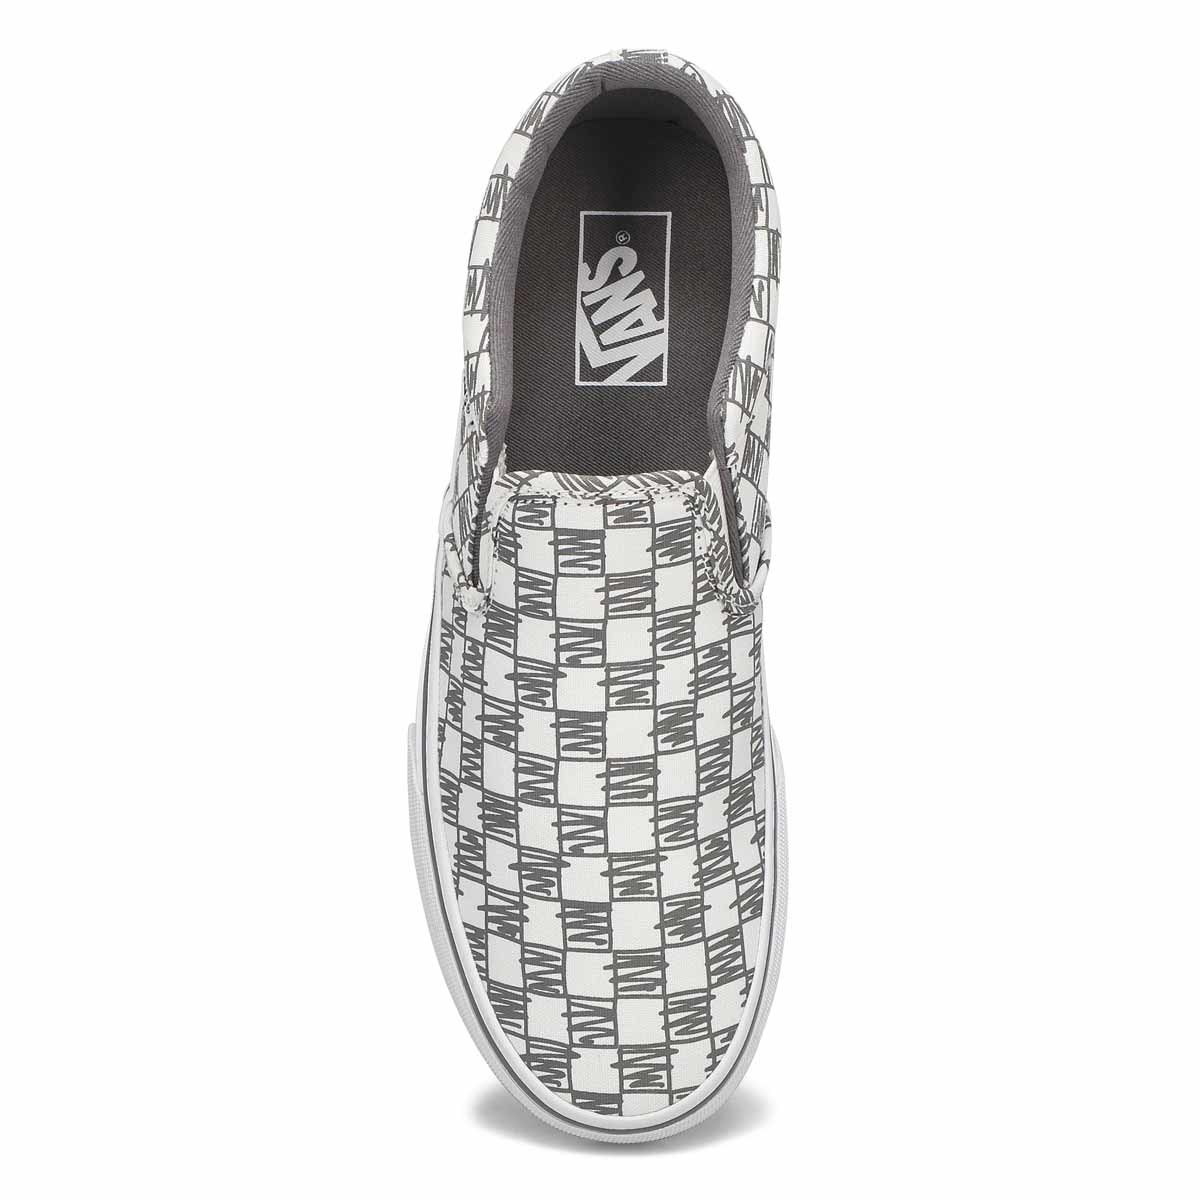 Men's Asher Sneaker - Checkered Sketched